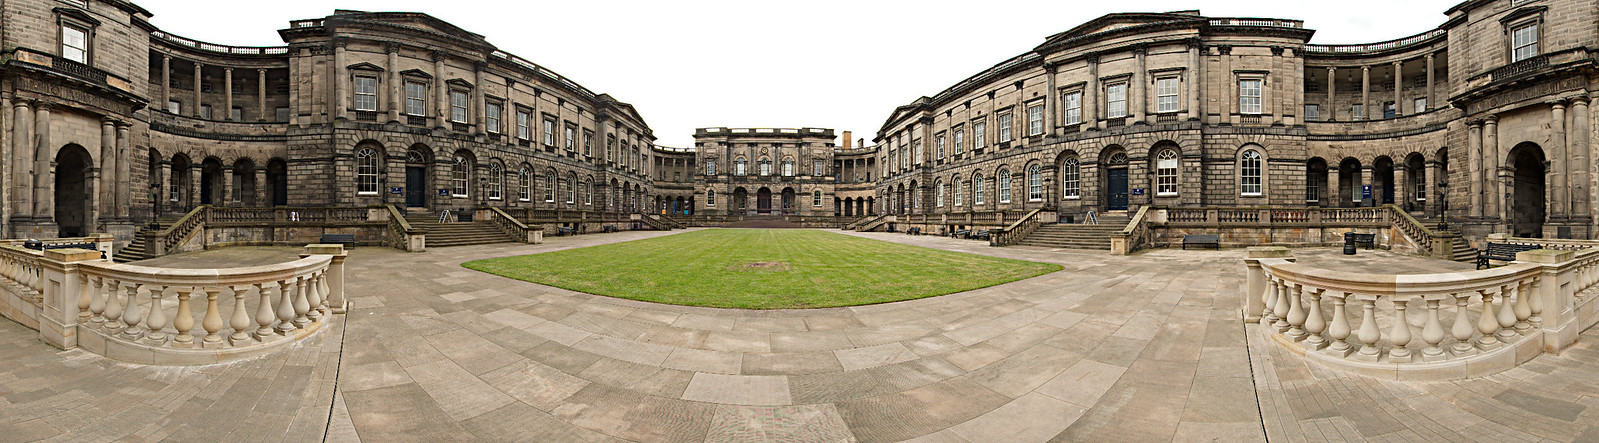 Old College Panorama